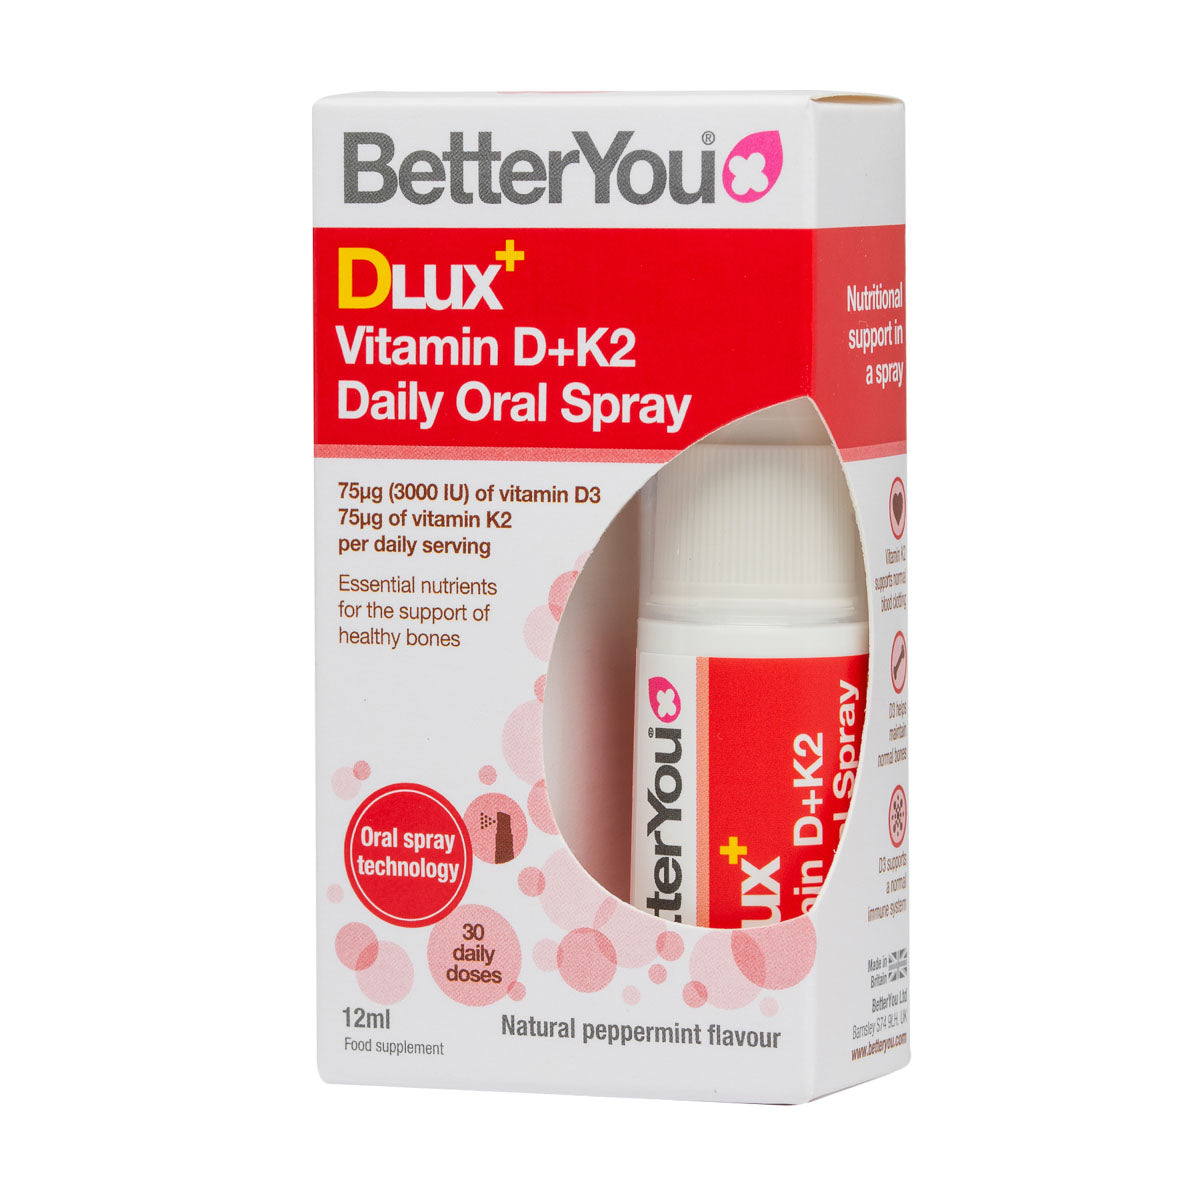 D-Lux &amp; Vitamin D &amp; K2 Oral Spray Vegan (12ml) | Better You | Raw Living UK | Supplements | BetterYou DLux+ Vitamin D+K2 Oral Spray is a high quality and strength supplement to Support Immunity, Blood Clotting and Healthy Bones.